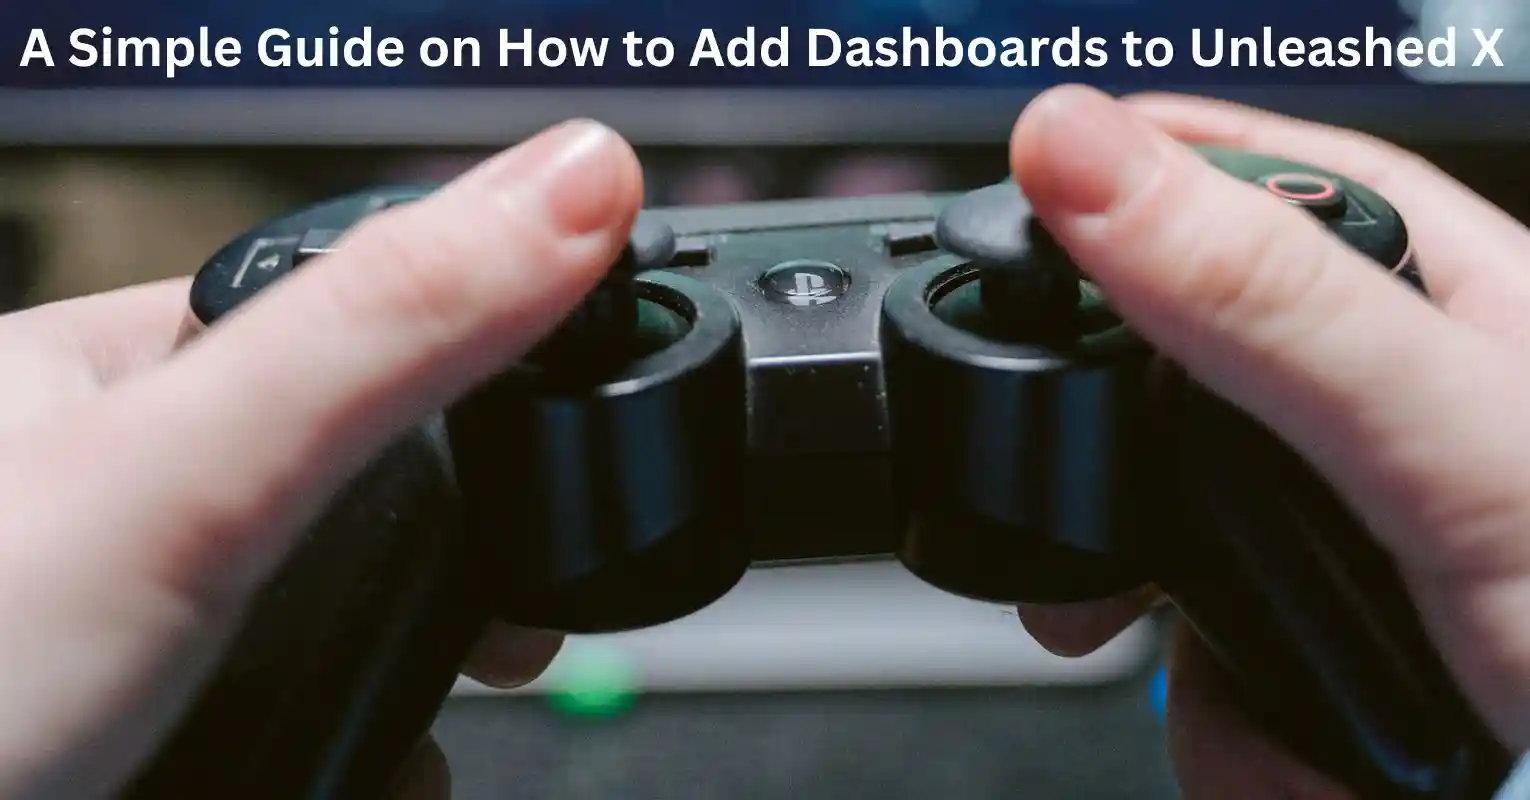 A Simple Guide on How to Add Dashboards to Unleashed X